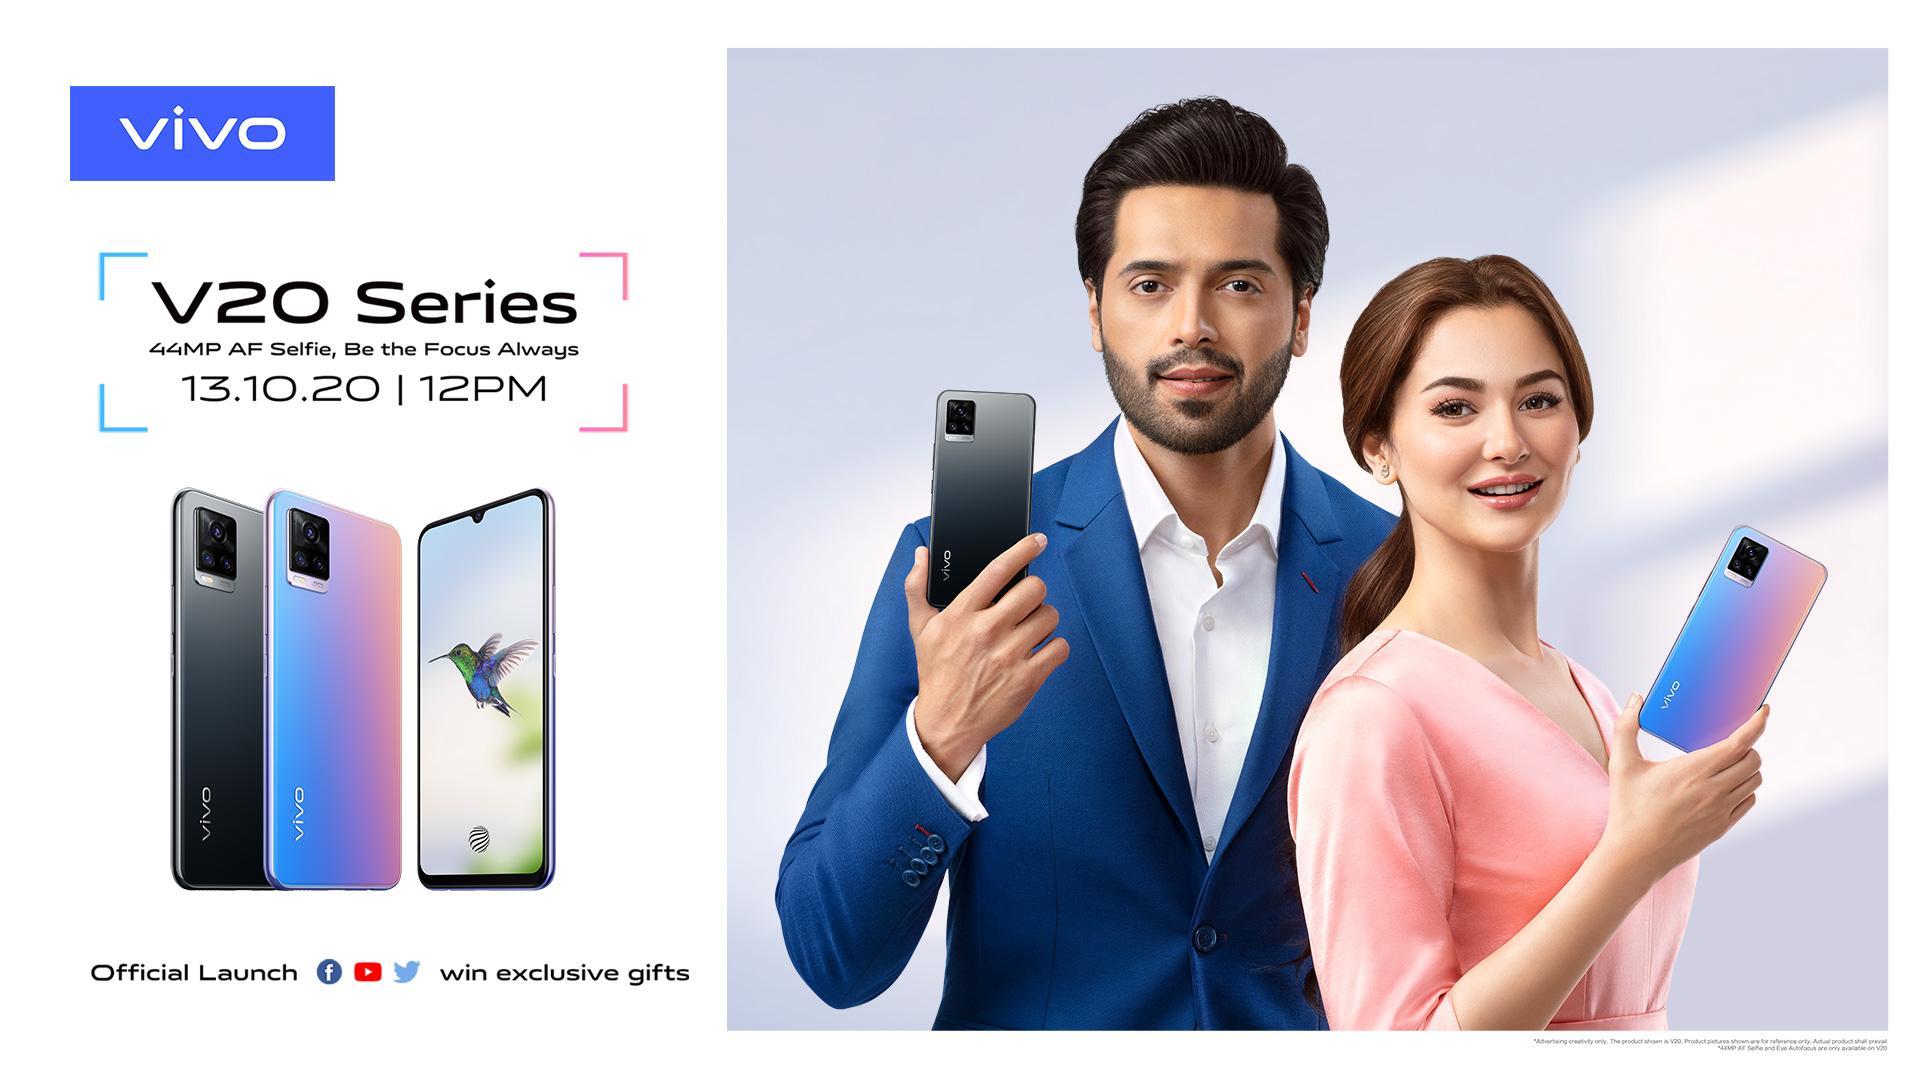 vivo to Launch the Flagship V20 Smartphone with 44MP Eye Autofocus in Pakistan on October 13